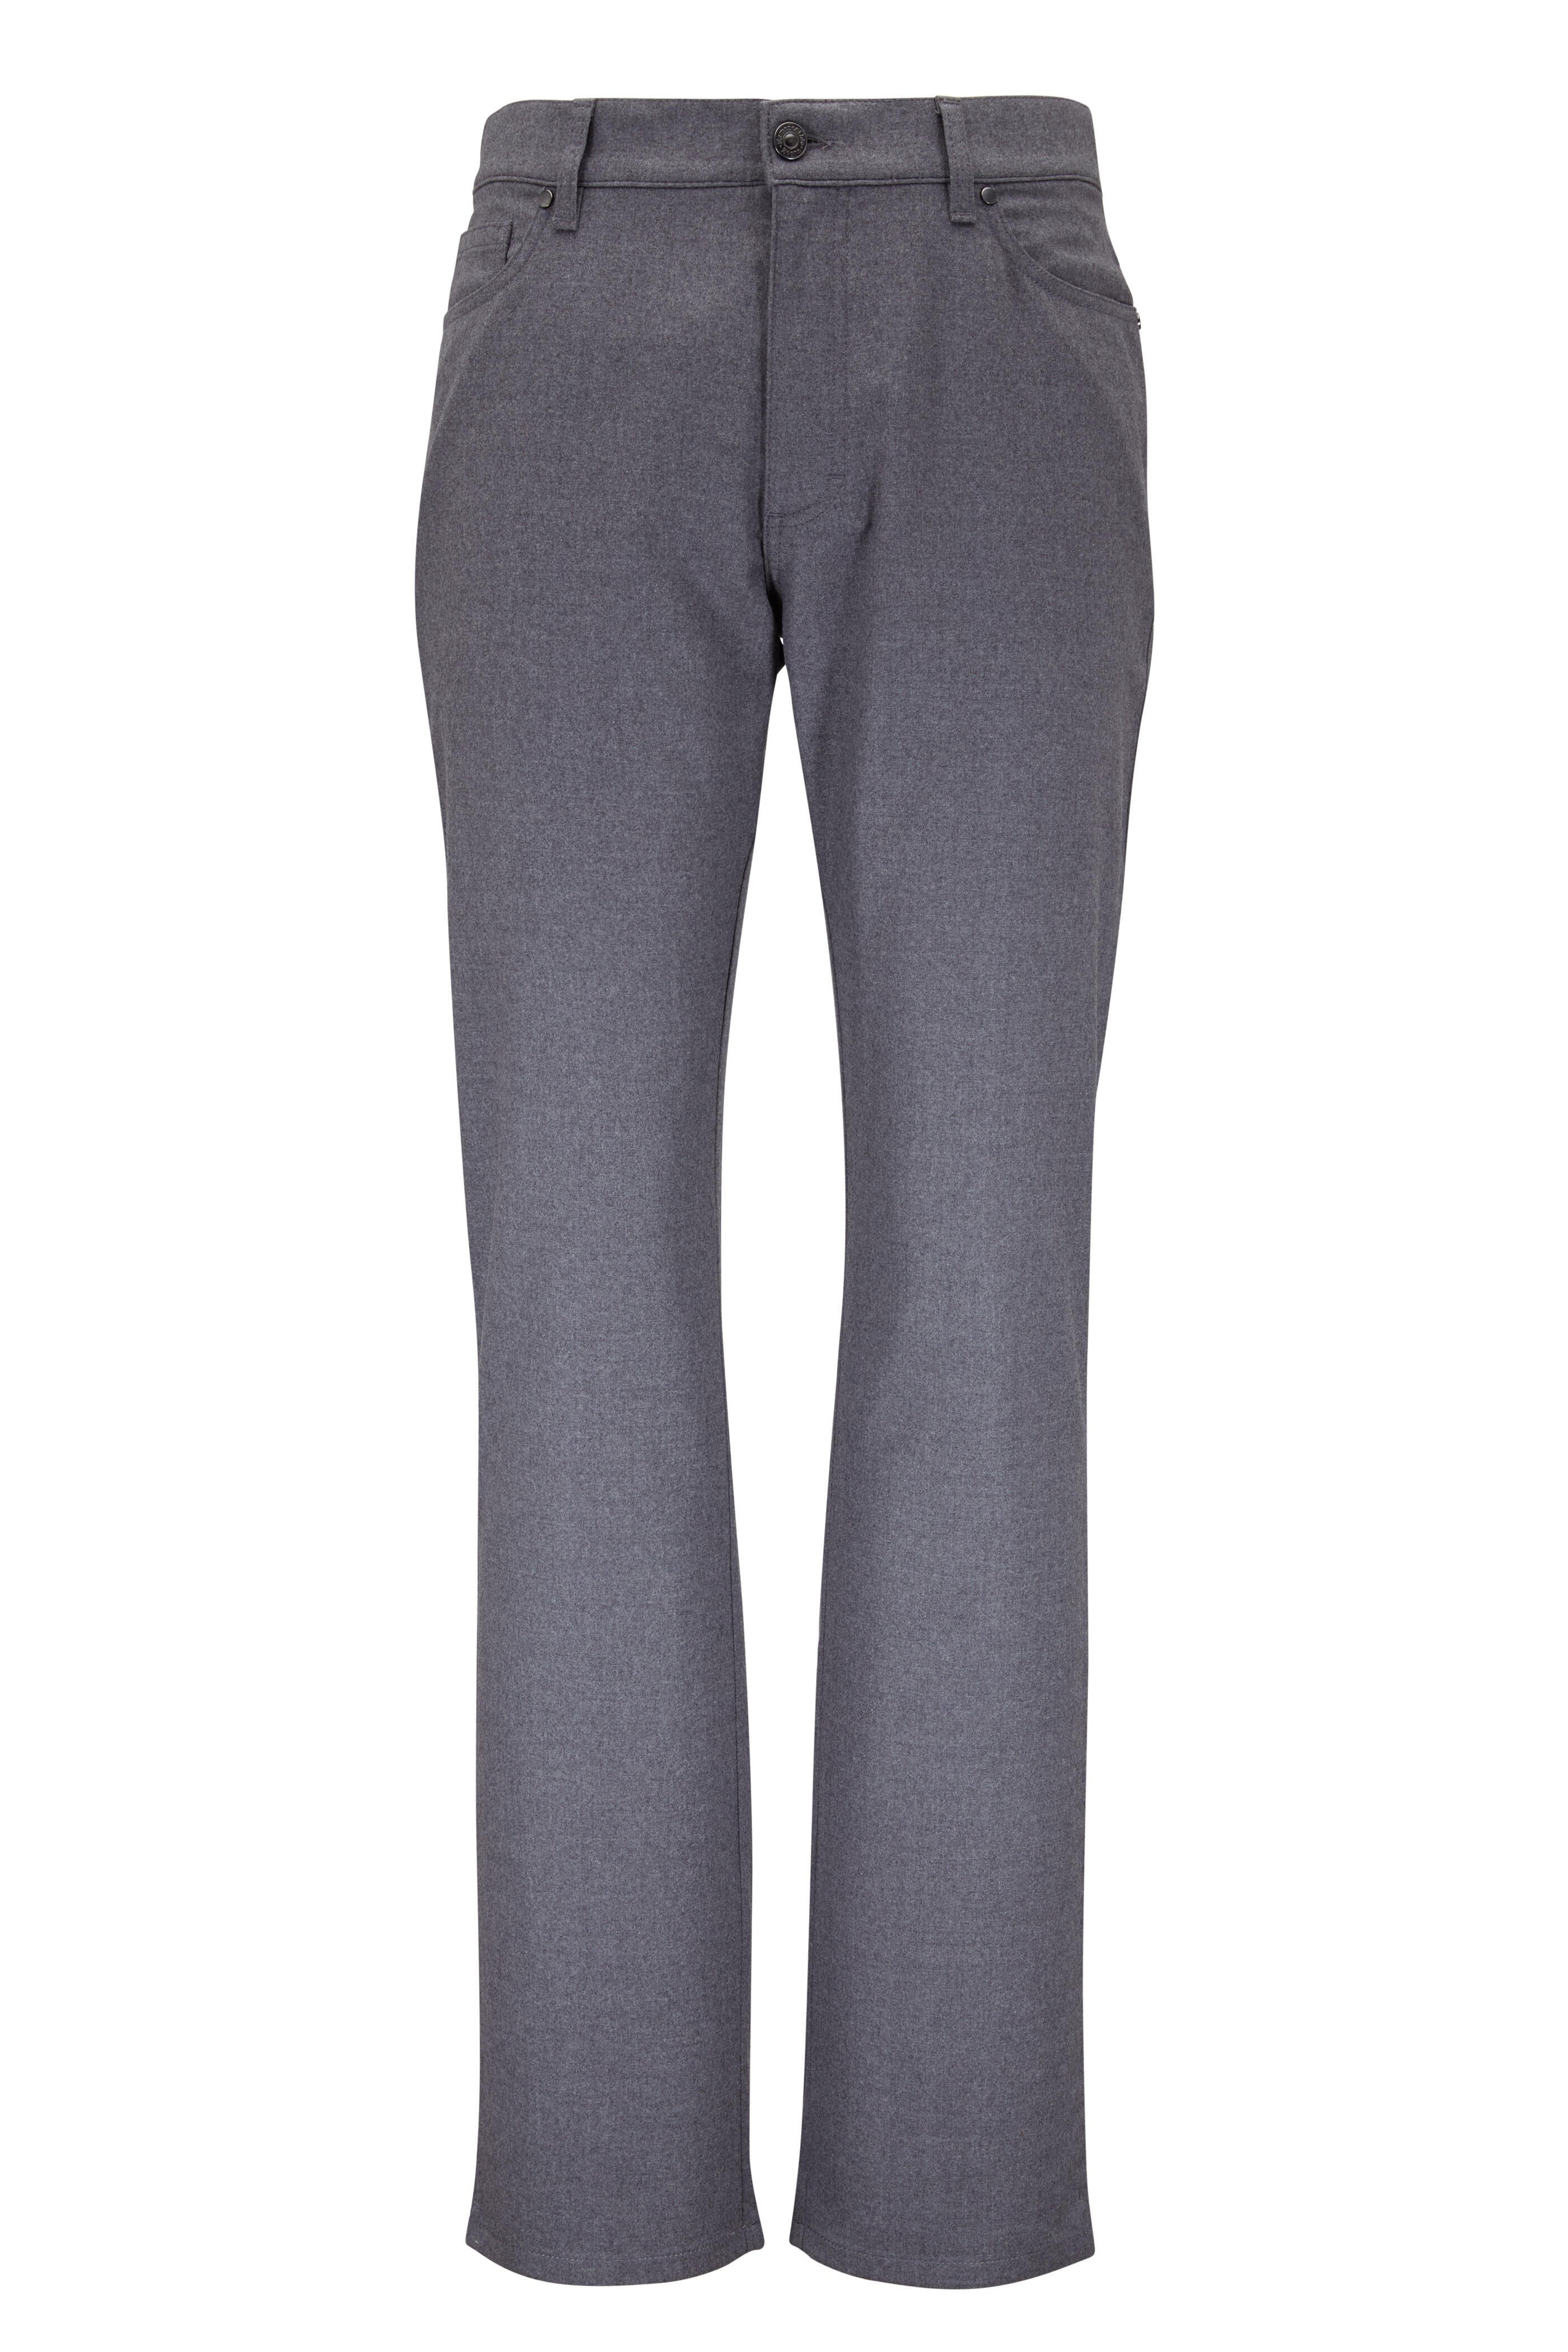 Zegna - Gray Wool Flannel Five Pocket Pant | Mitchell Stores